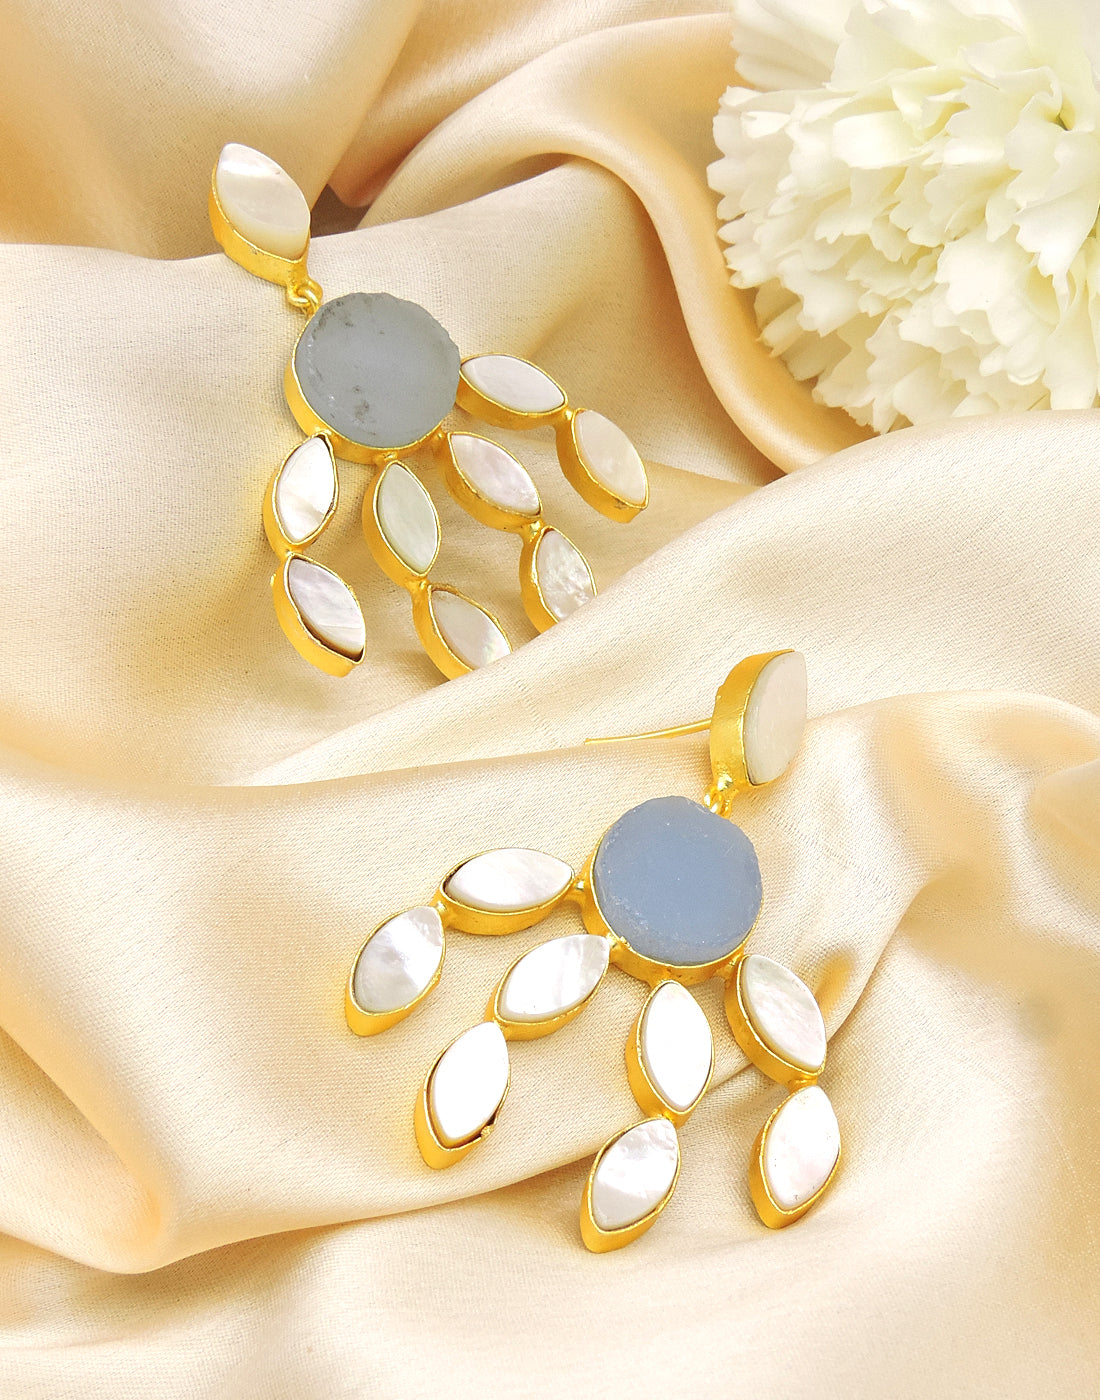 Curtain Earrings (Blue Onyx) - Statement Earrings - Gold-Plated & Hypoallergenic - Made in India - Dubai Jewellery - Dori